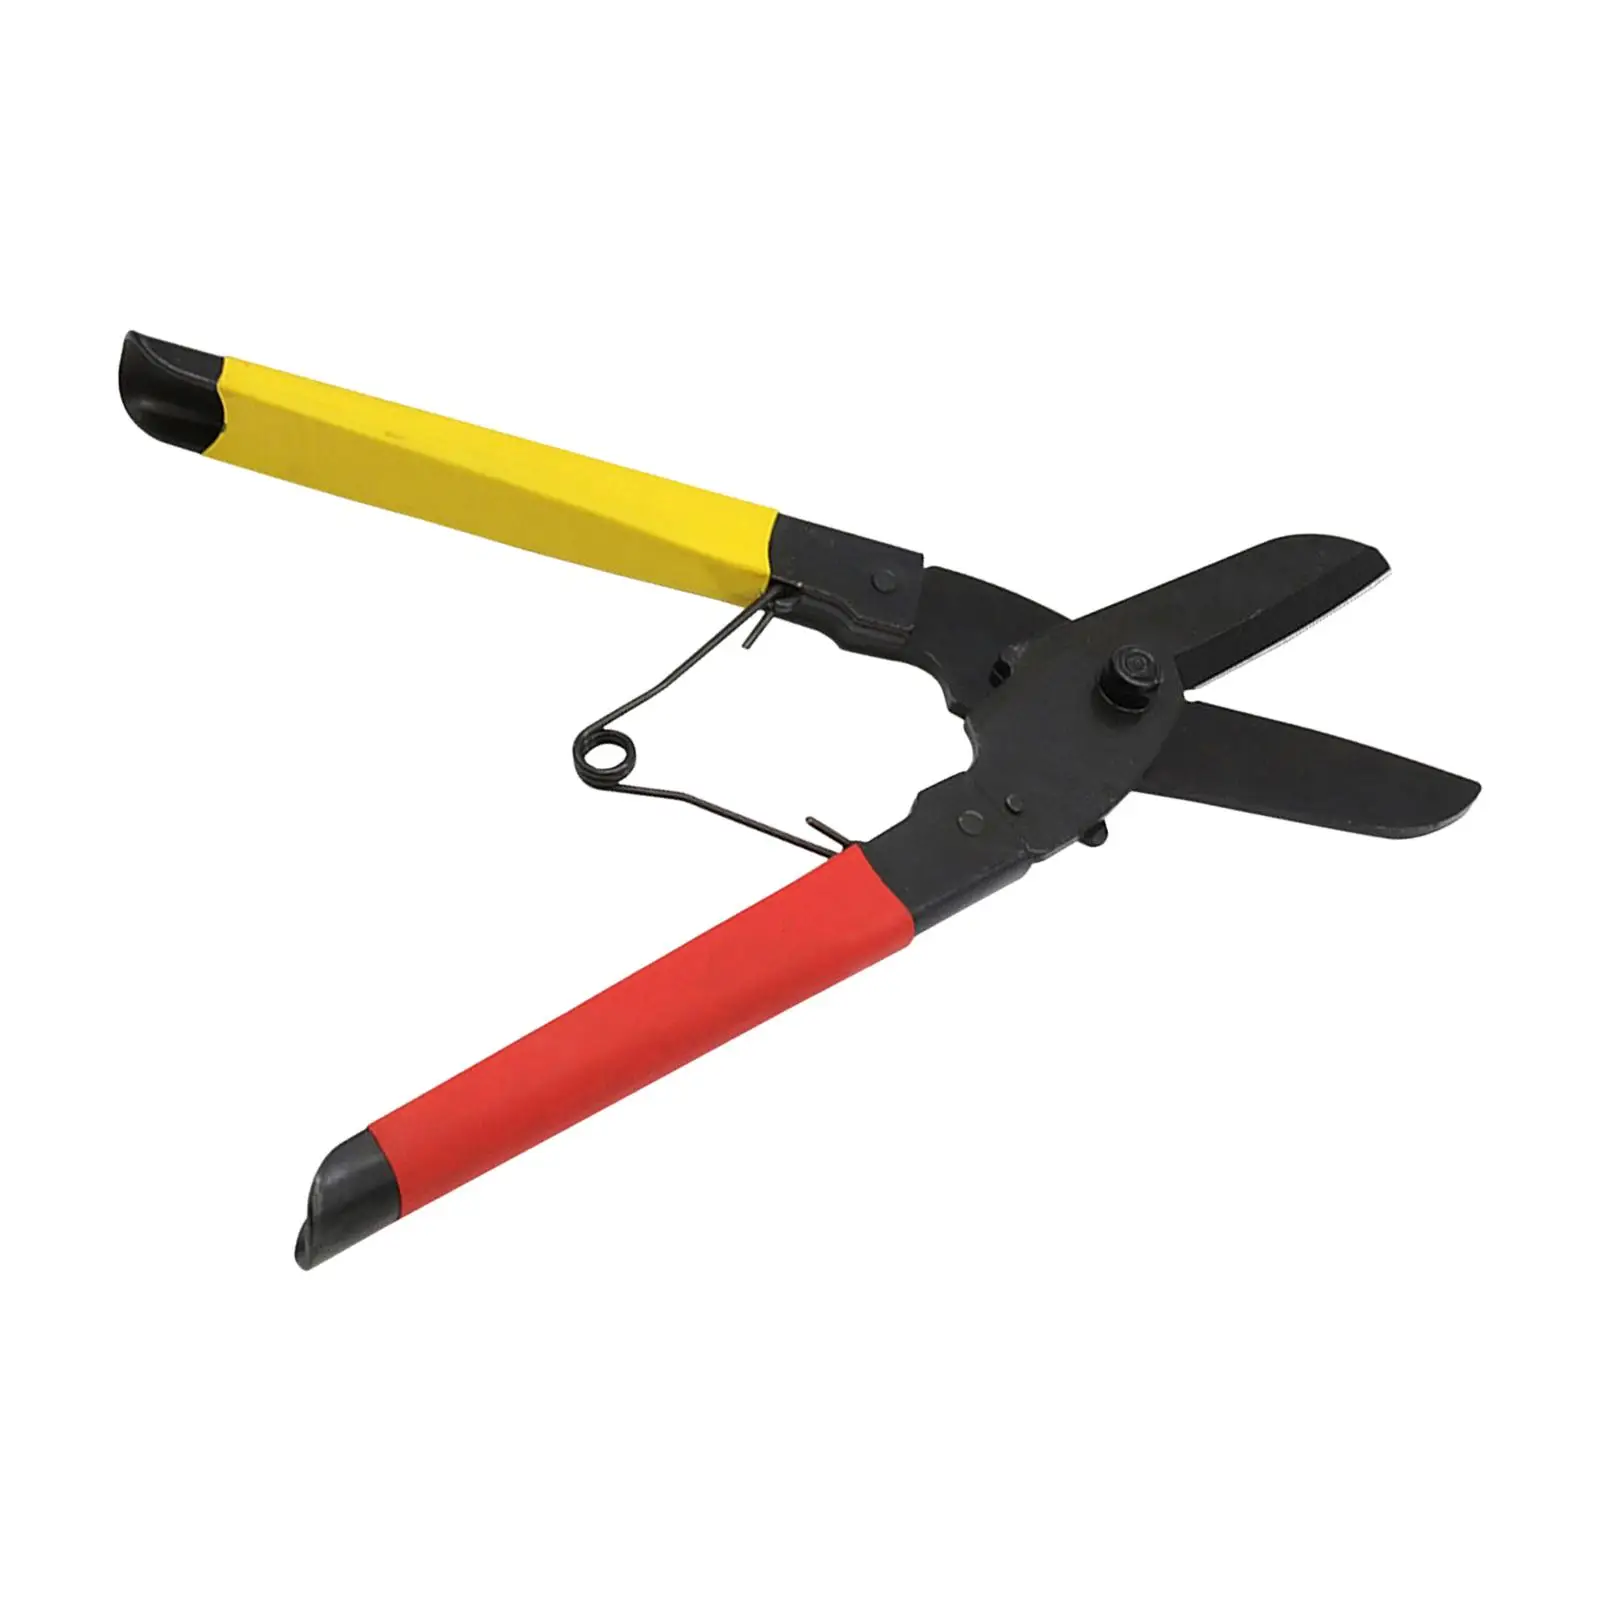 Gardening Scissors Metal Sheet Cutter Hand Tool Wire Cutter Heavy Duty Hand Shear for Plate Plumbing Cables Carpet